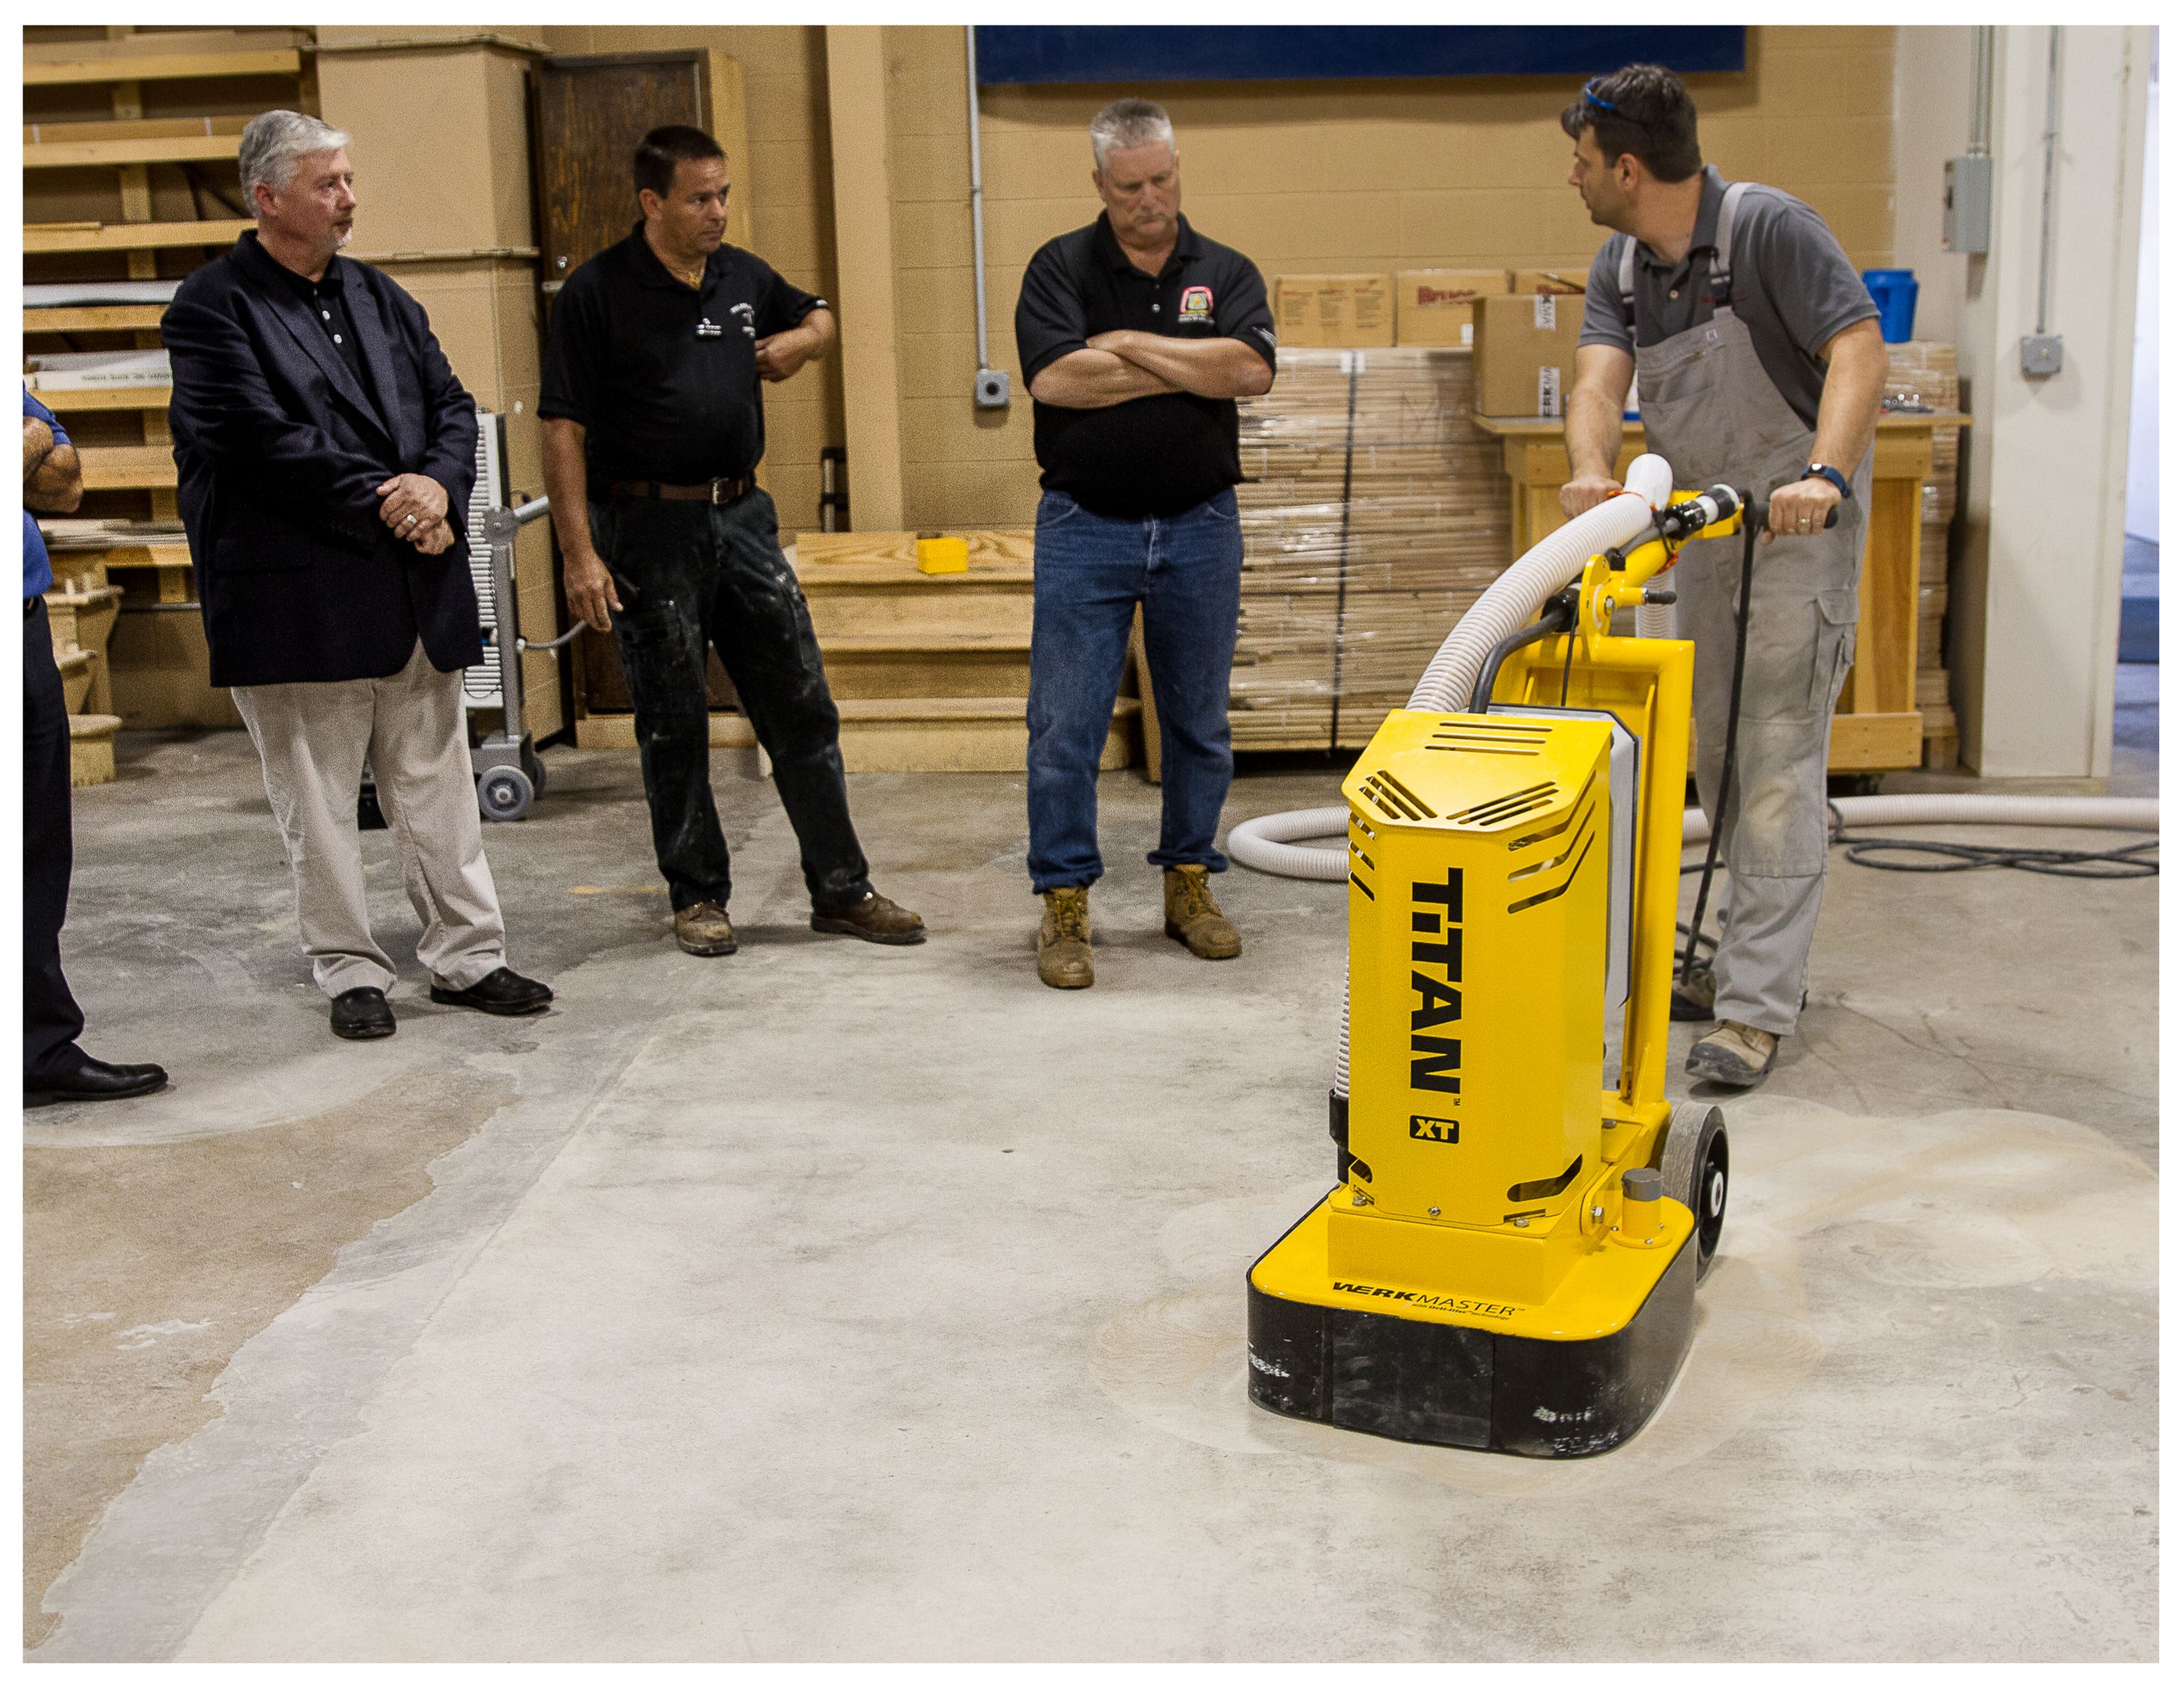 For Faller, this is an exciting time for the industry and represents a major opportunity for INSTALL to exact change in the world of concrete polishing.